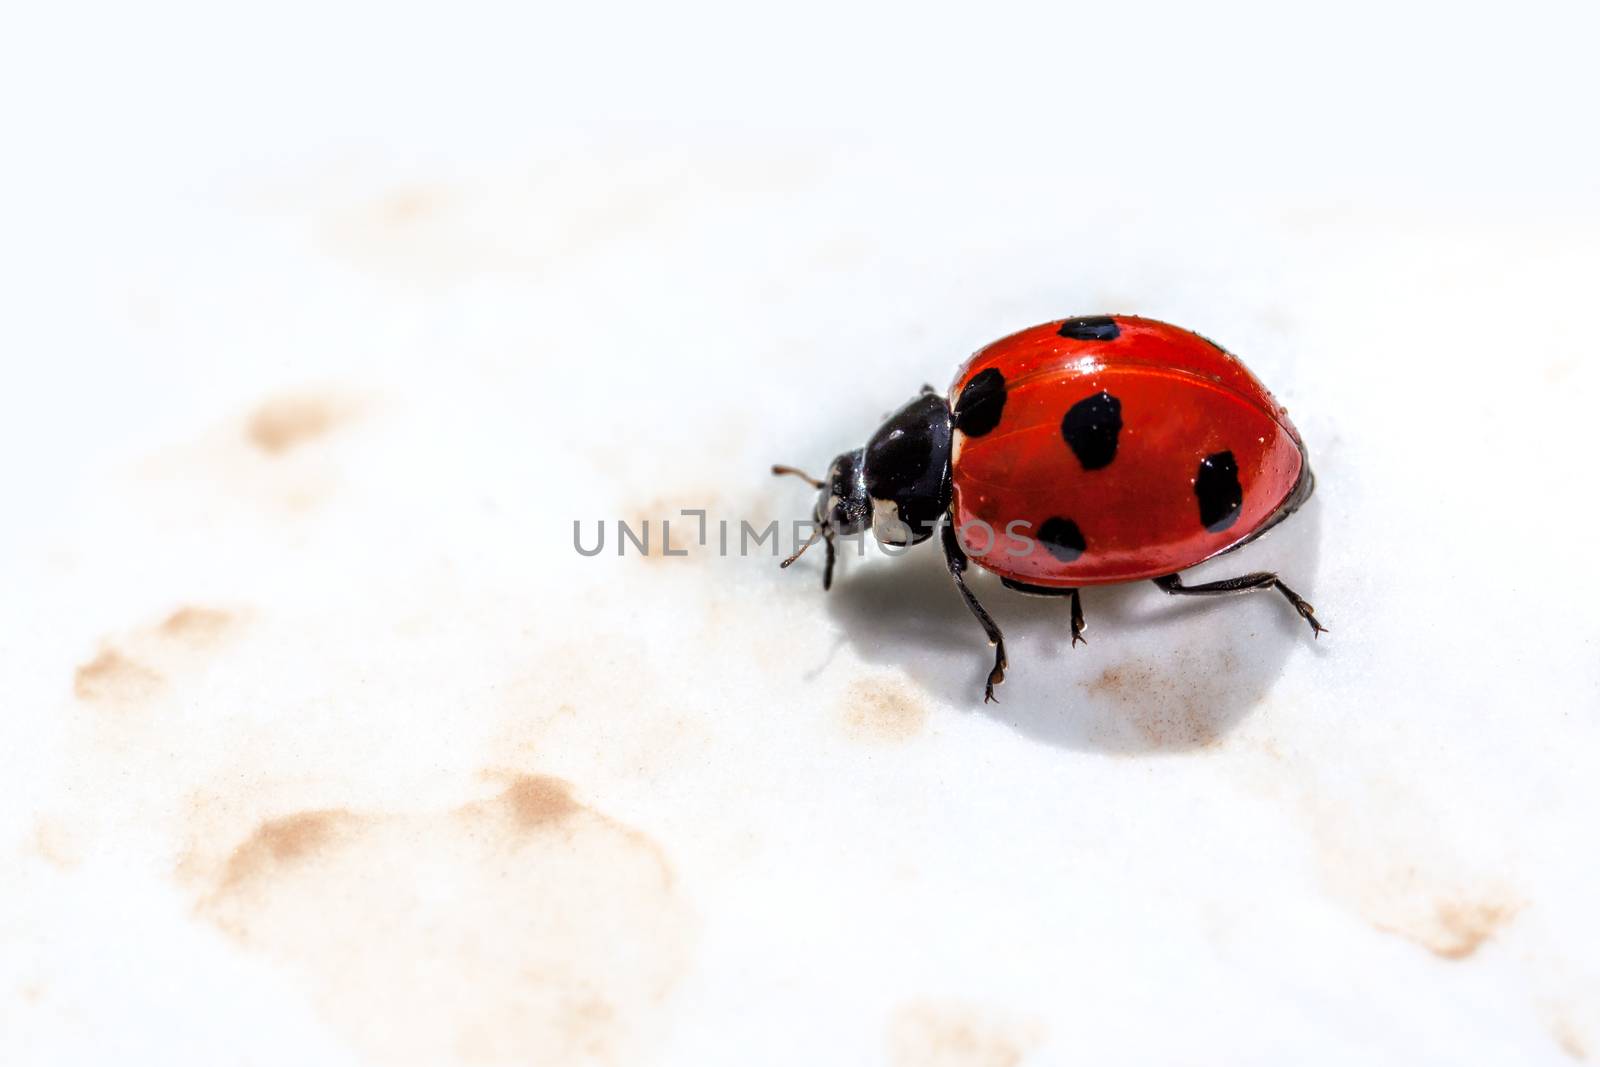 A little ladybird or coccinellid takes a stroll on a white flower petal.